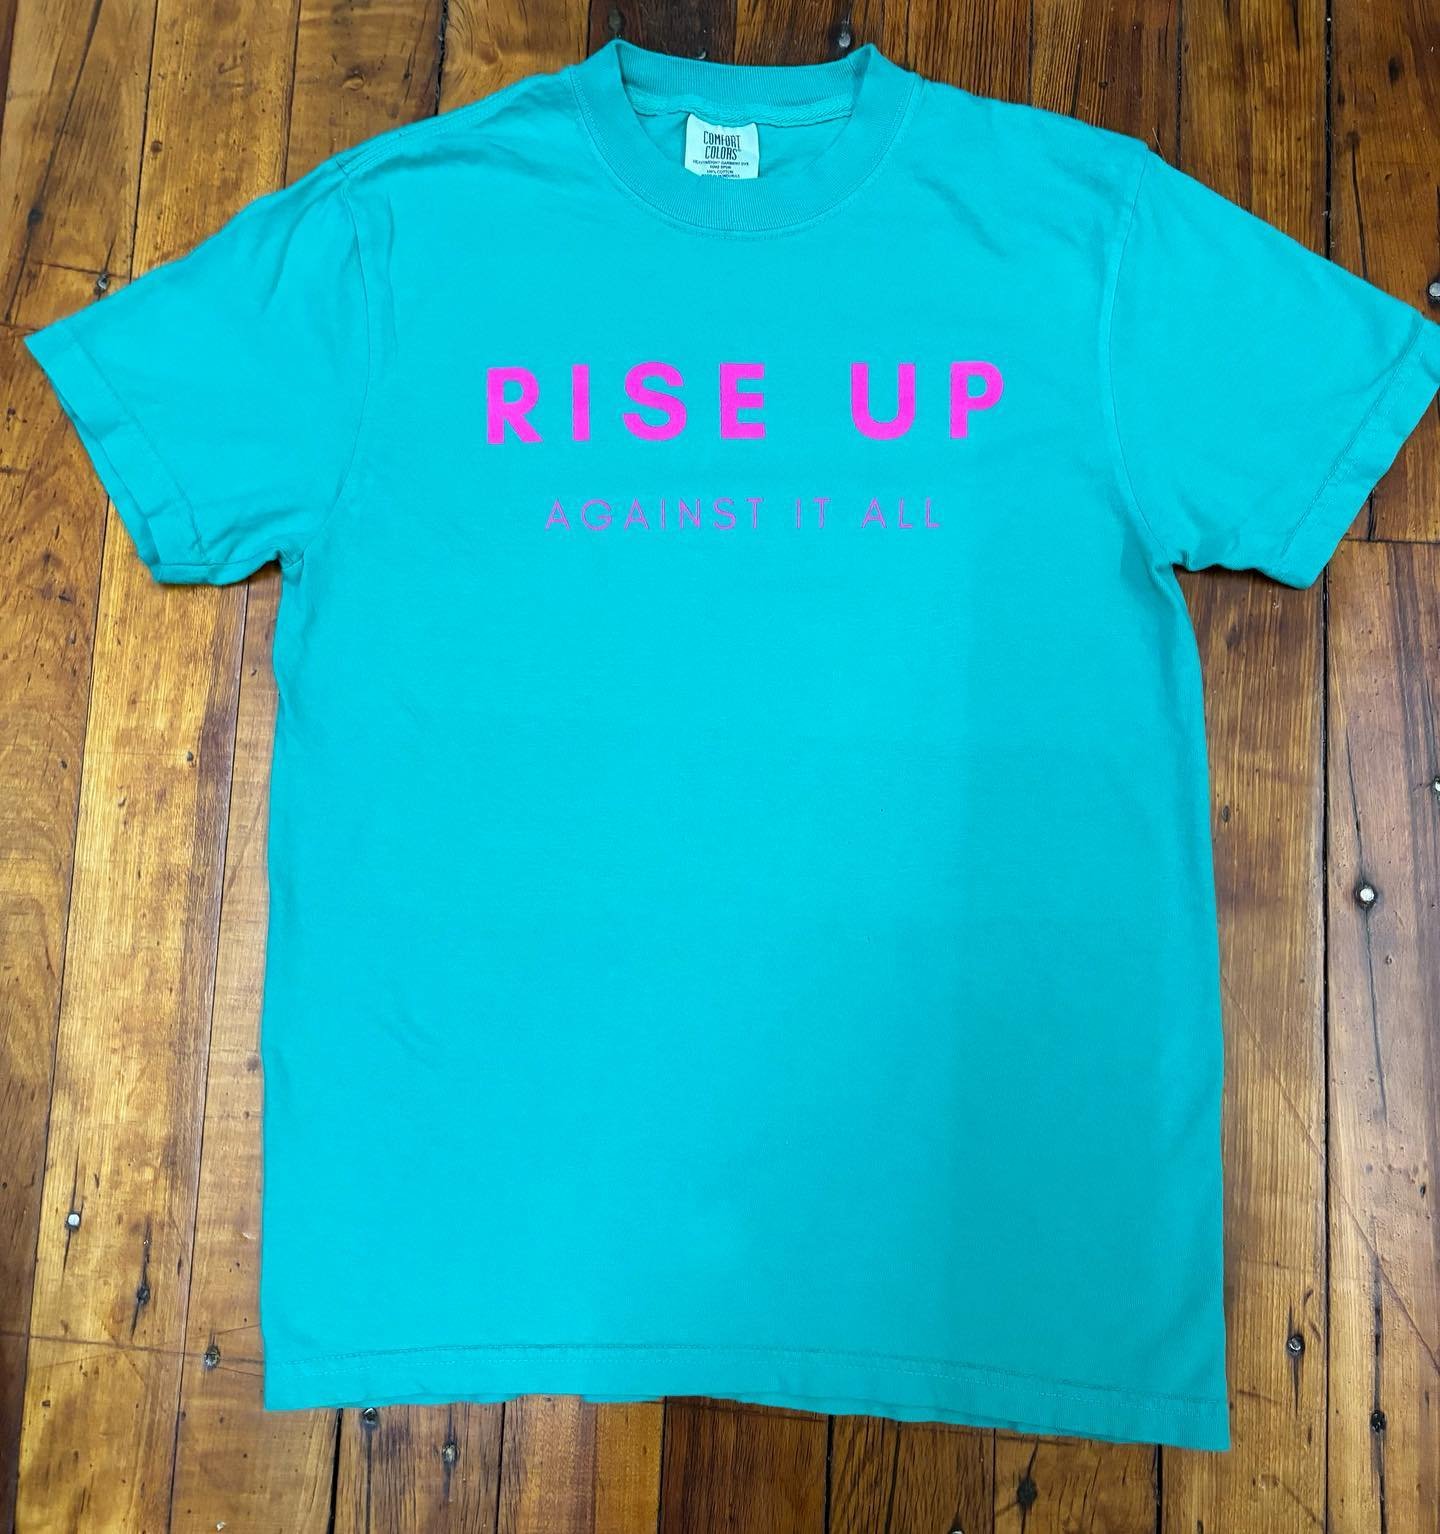 @adaywithoutlove is about to sell out of these rise shirts!! 

New design for him incoming!! 

Commissions open with late May turnaround!